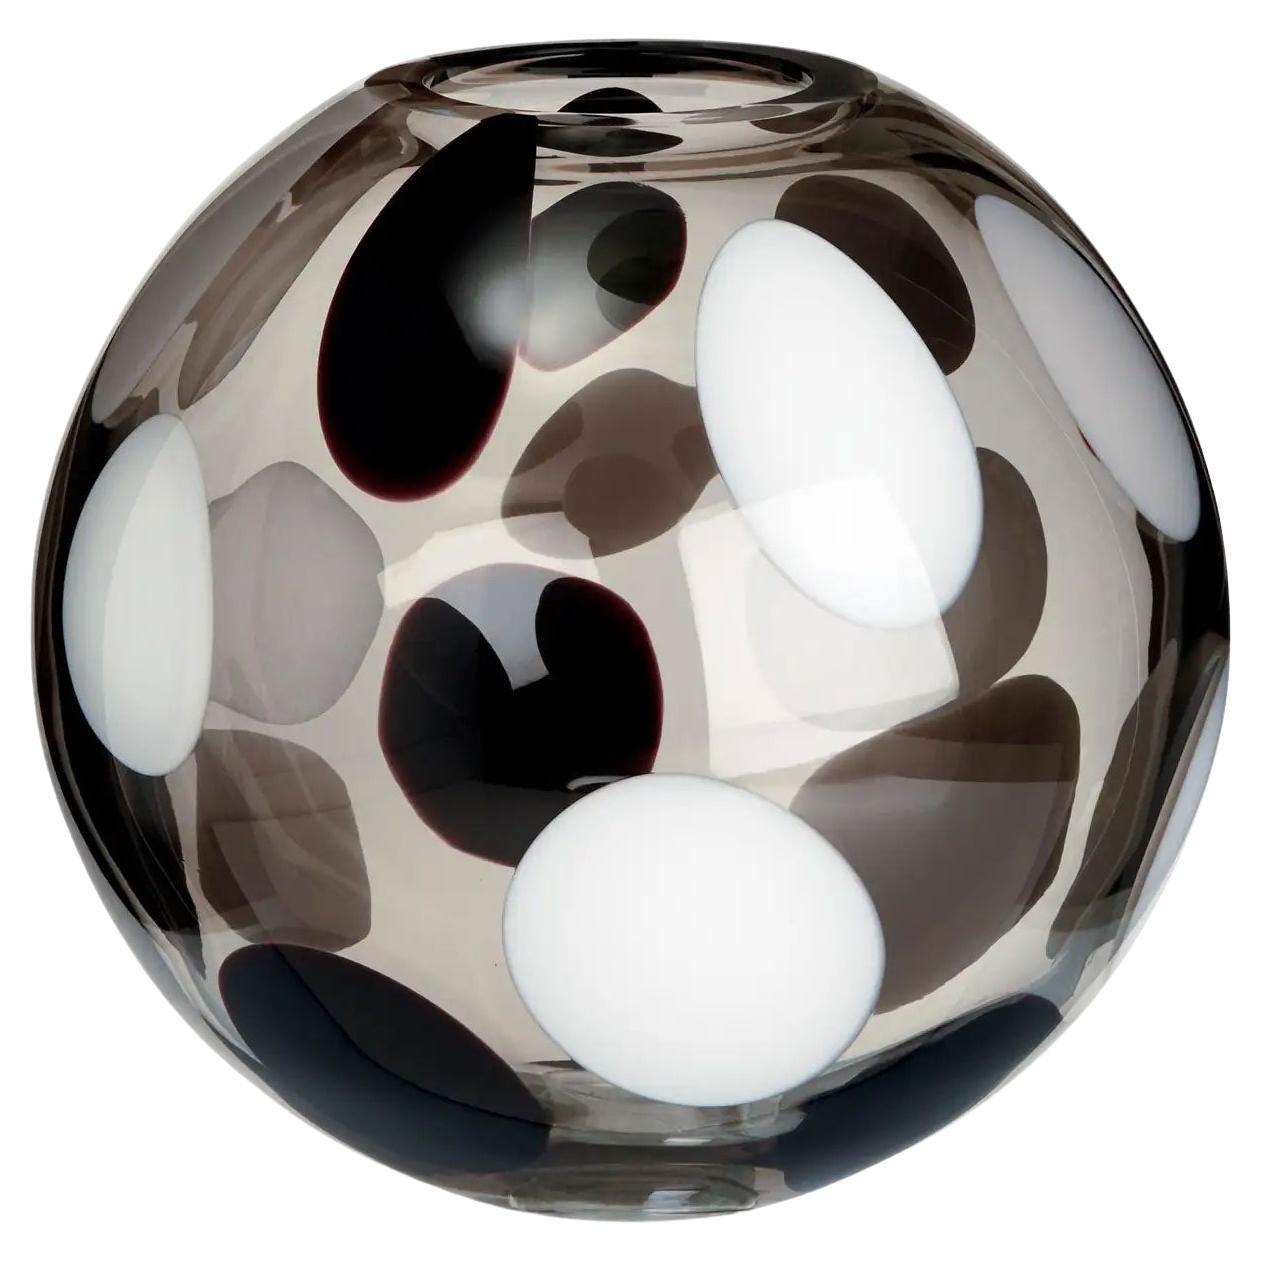 Large Sfera Vase with White, Grey and Black Spots by Carlo Moretti For Sale